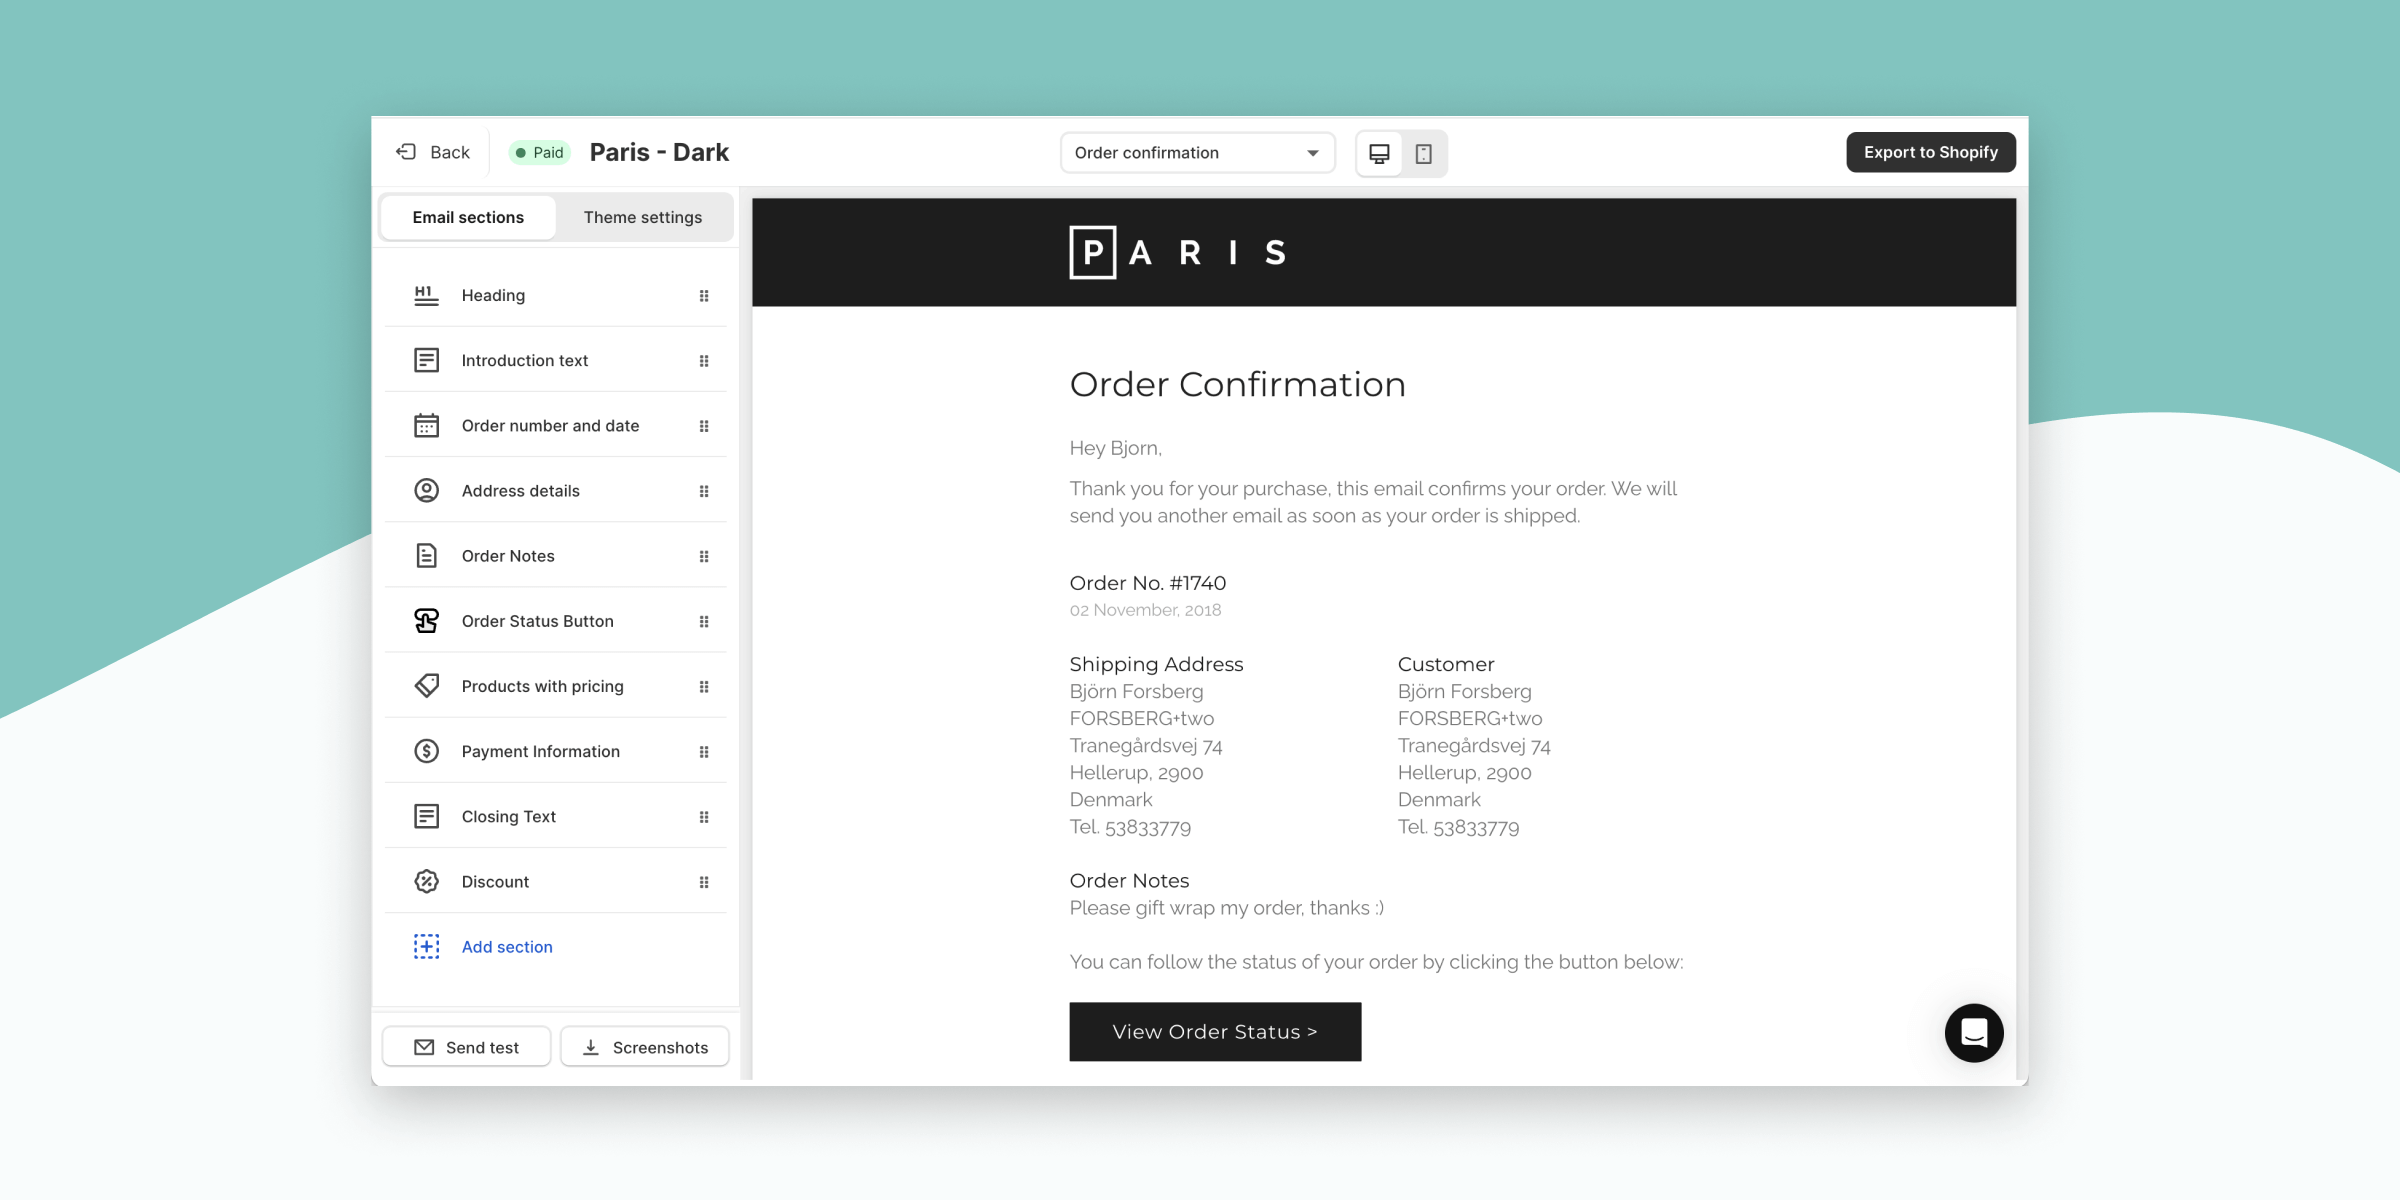 Redesigned OrderlyEmails email editor interface